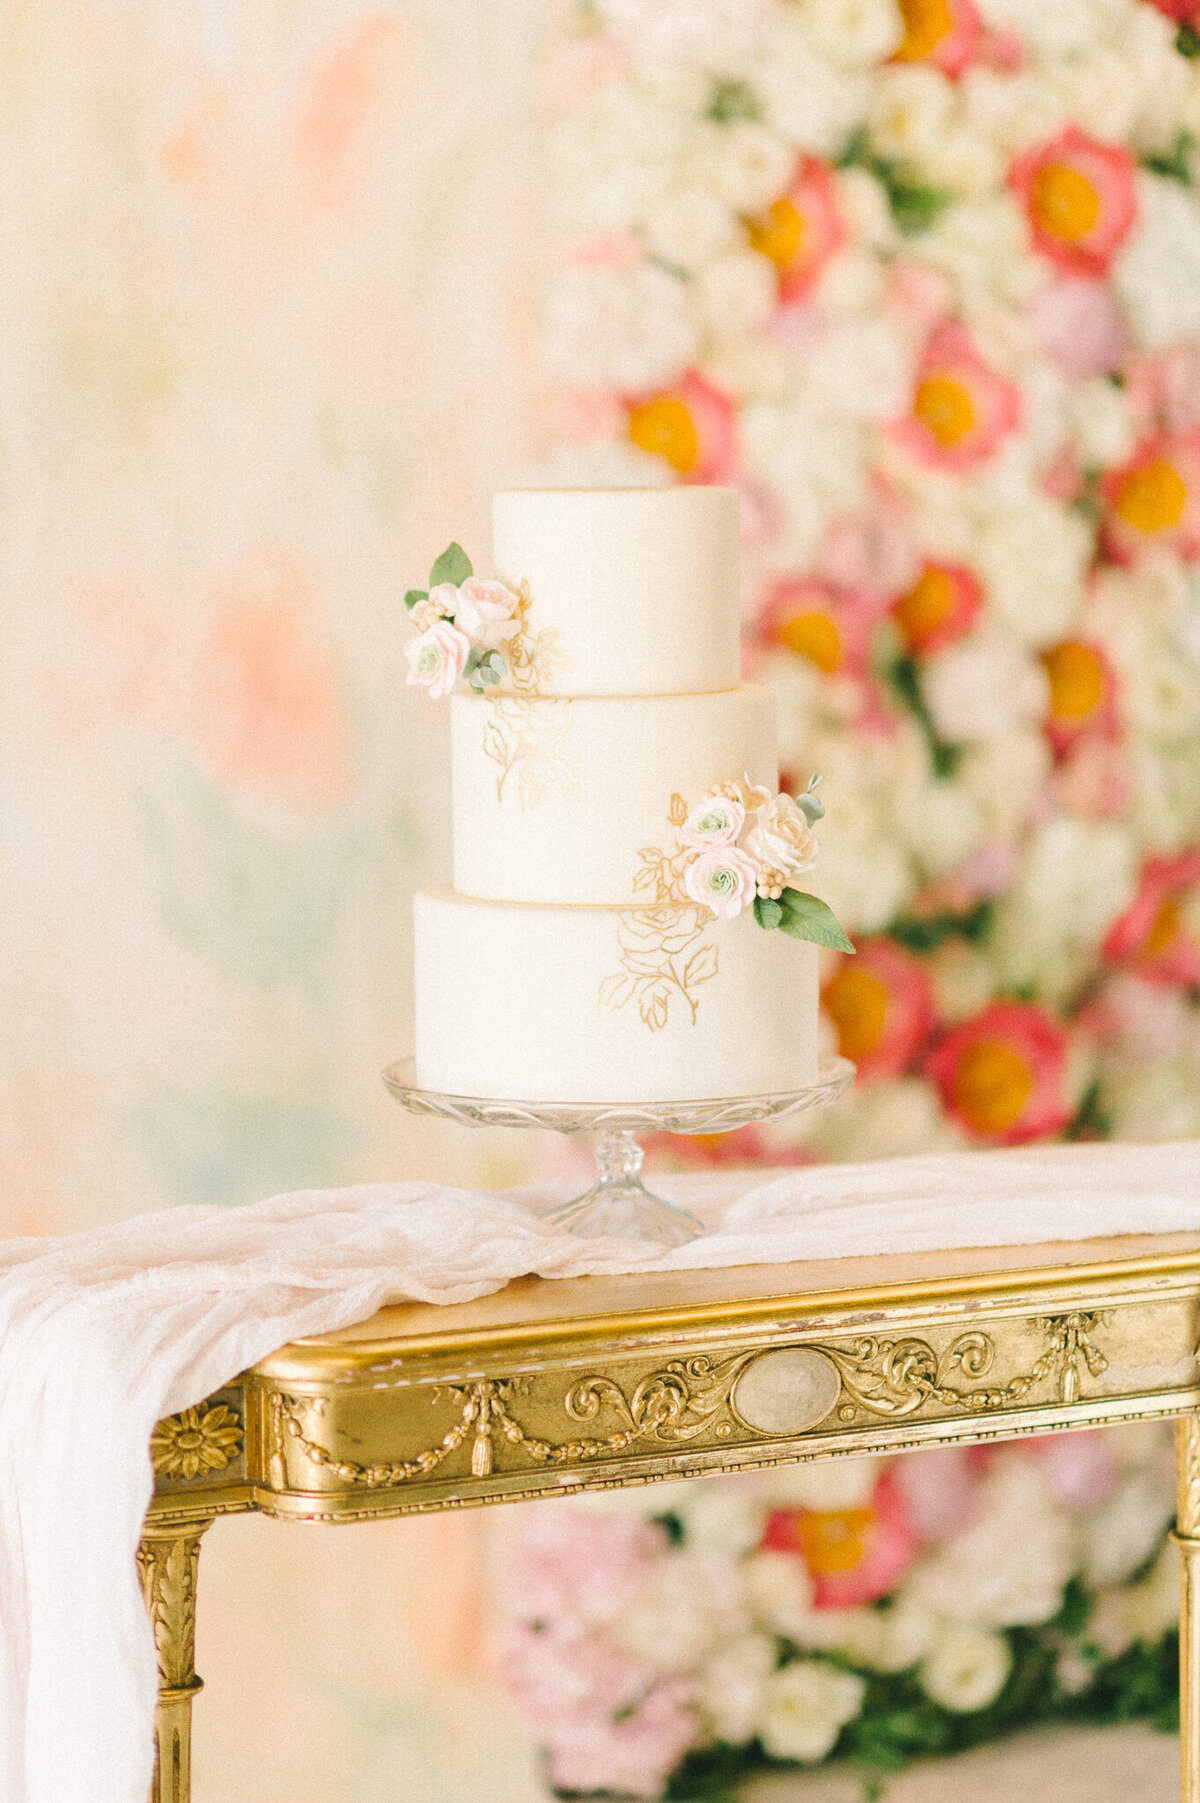 Classic, timeless three-tier white wedding cake with small simple pink roses and hand painted detail, created by Brianne Gabrielle Cakes,  elegant cakes & desserts in Edmonton, AB, featured on the Brontë Bride Vendor Guide.